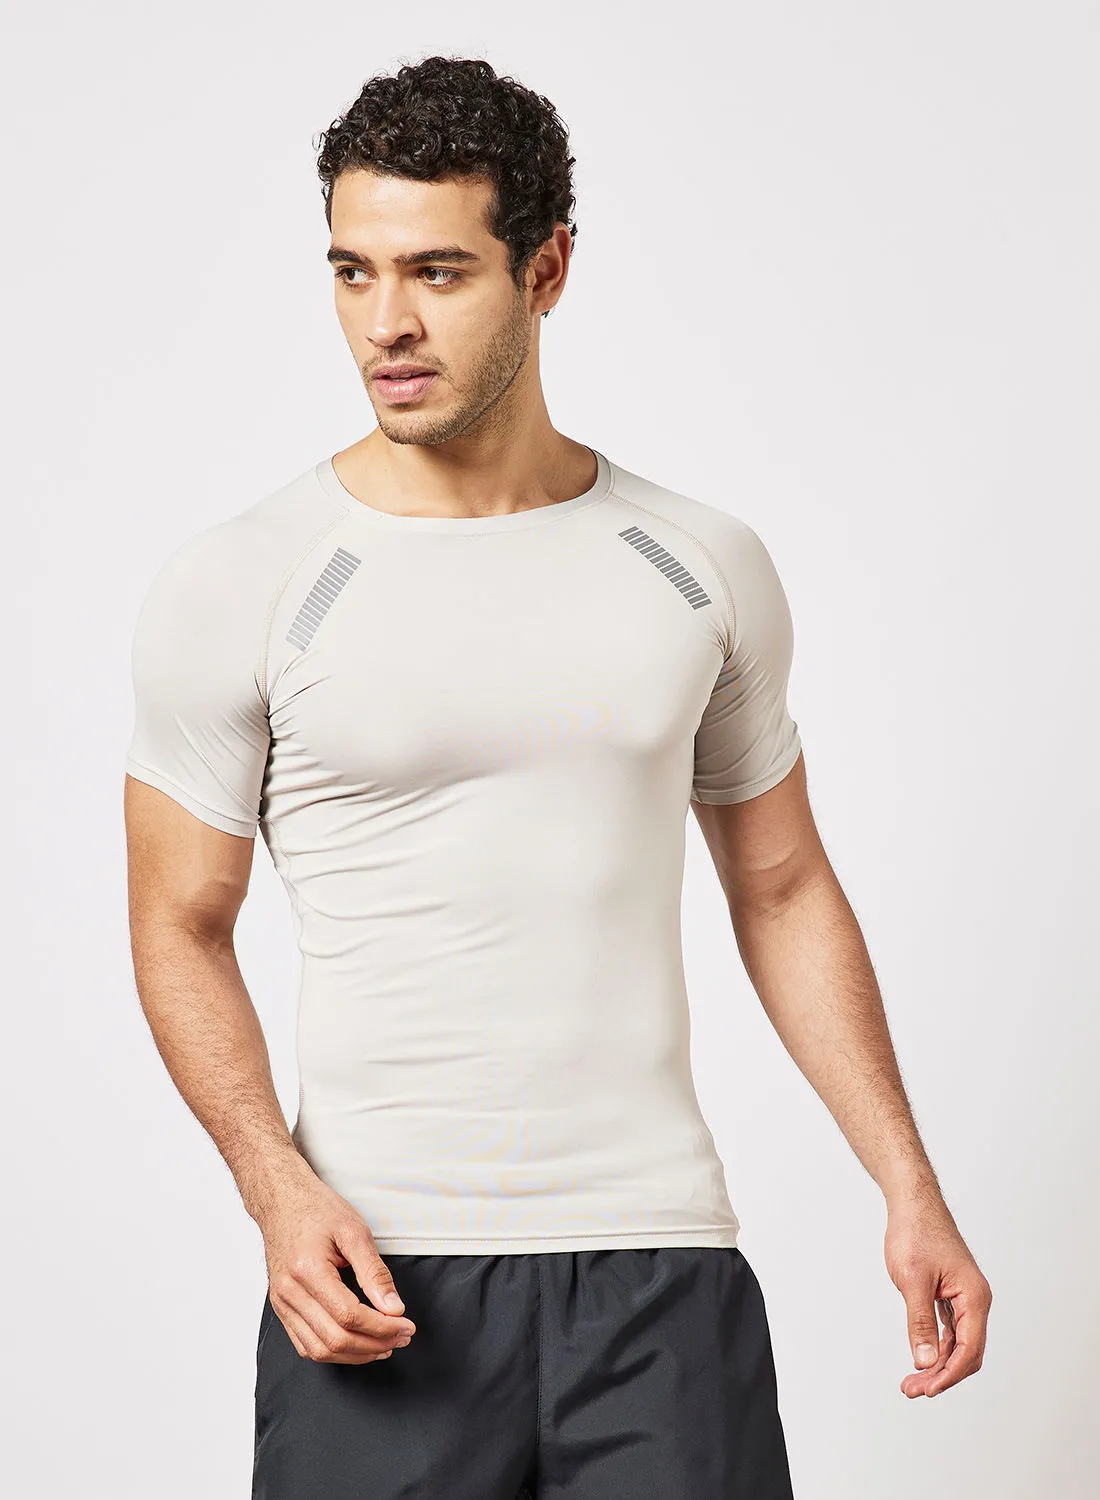 STATE 8 Active Sports T-Shirt Light Grey